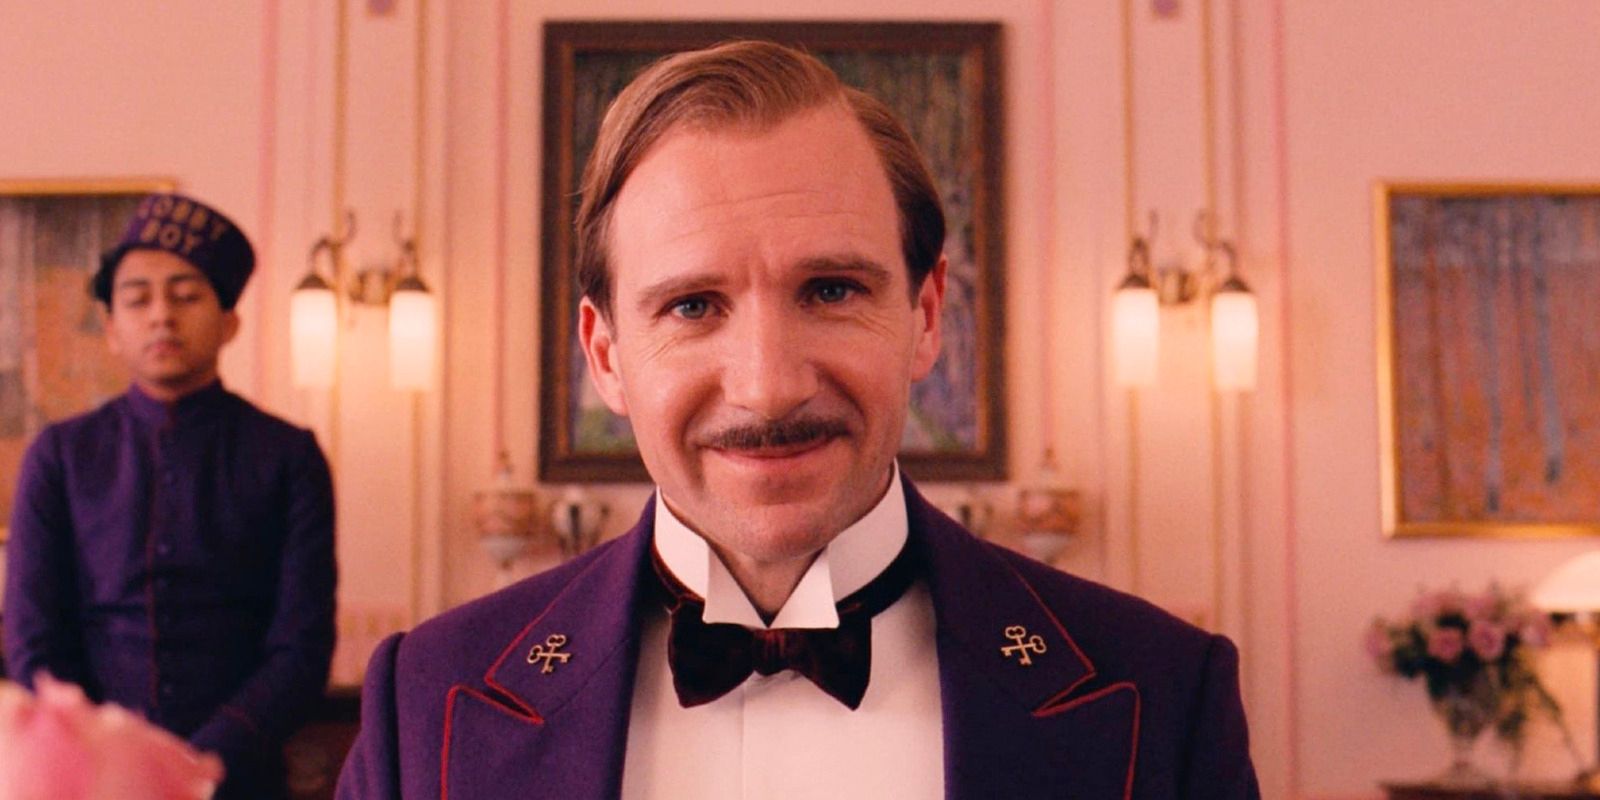 M. Gustave smiling at the camera in The Grand Budapest Hotel